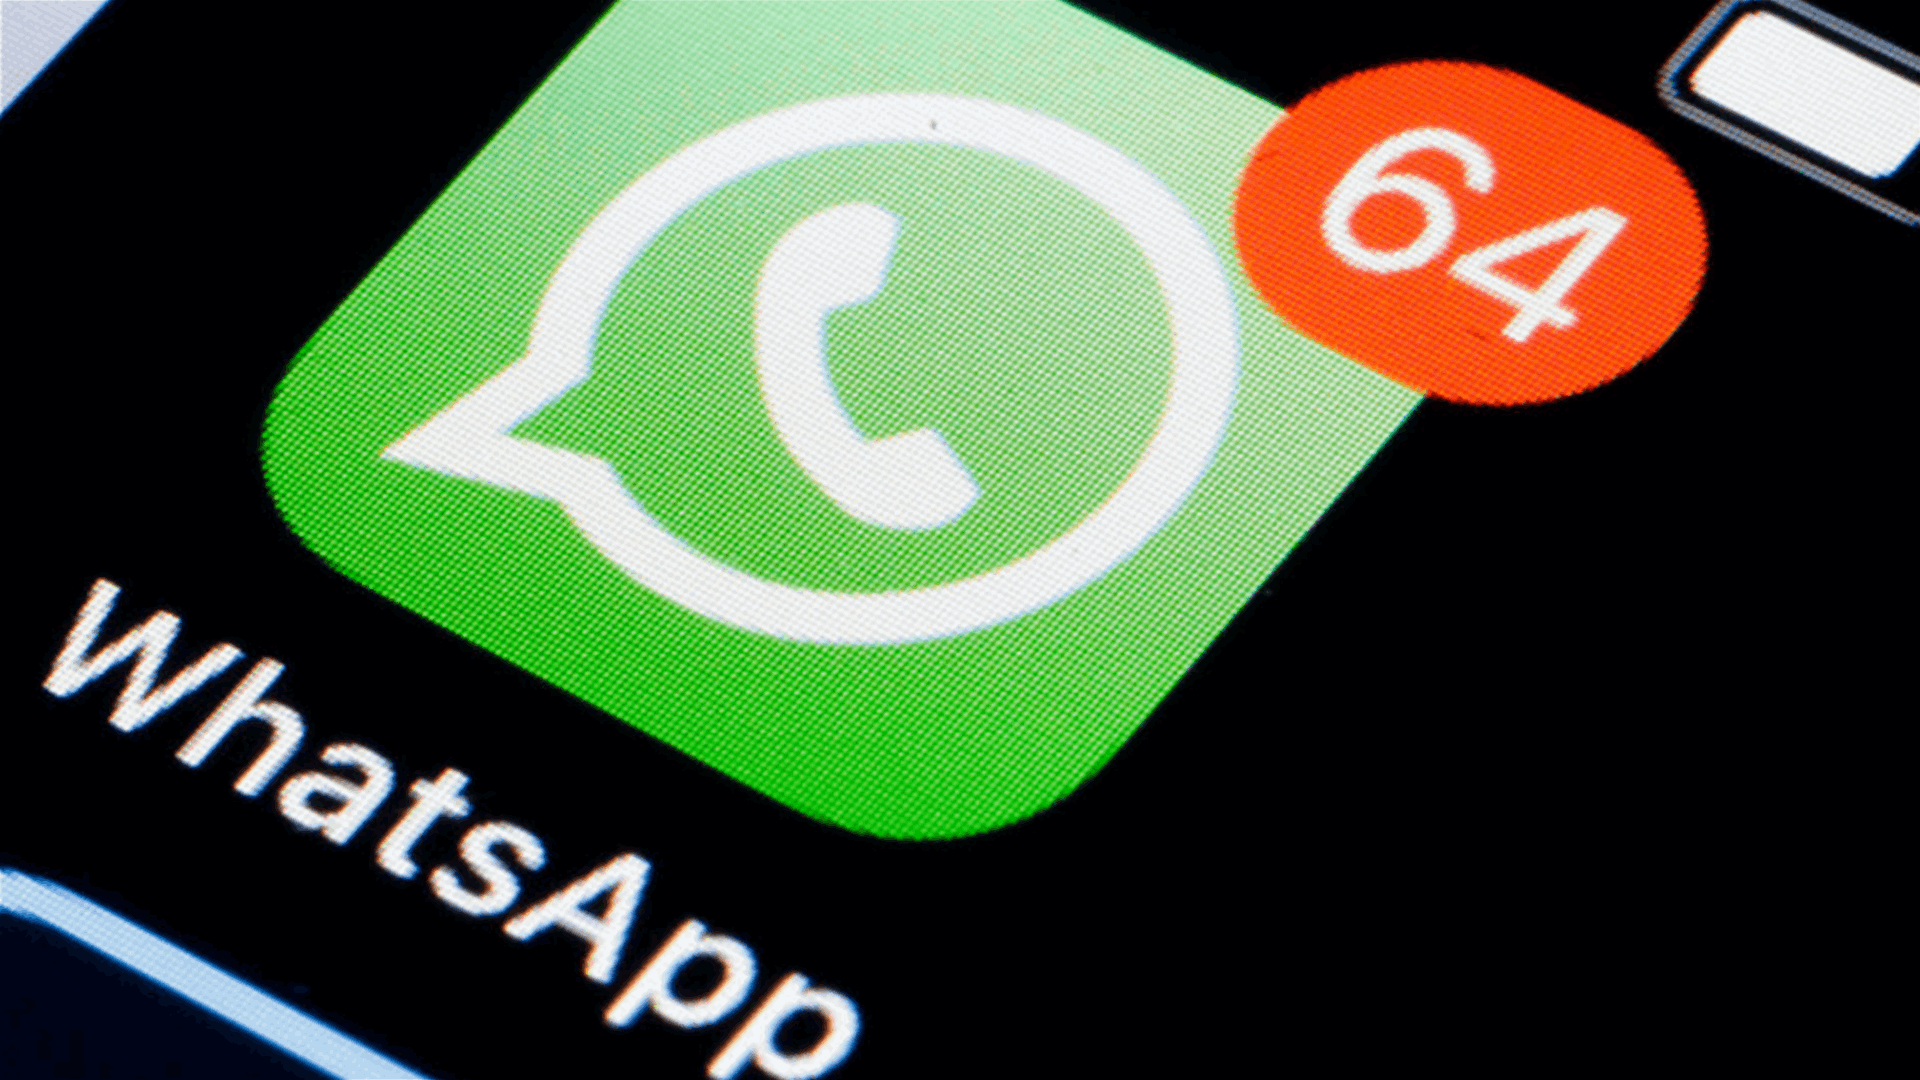 WhatsApp Business crosses 200M MAUs, introduces personalized messages feature